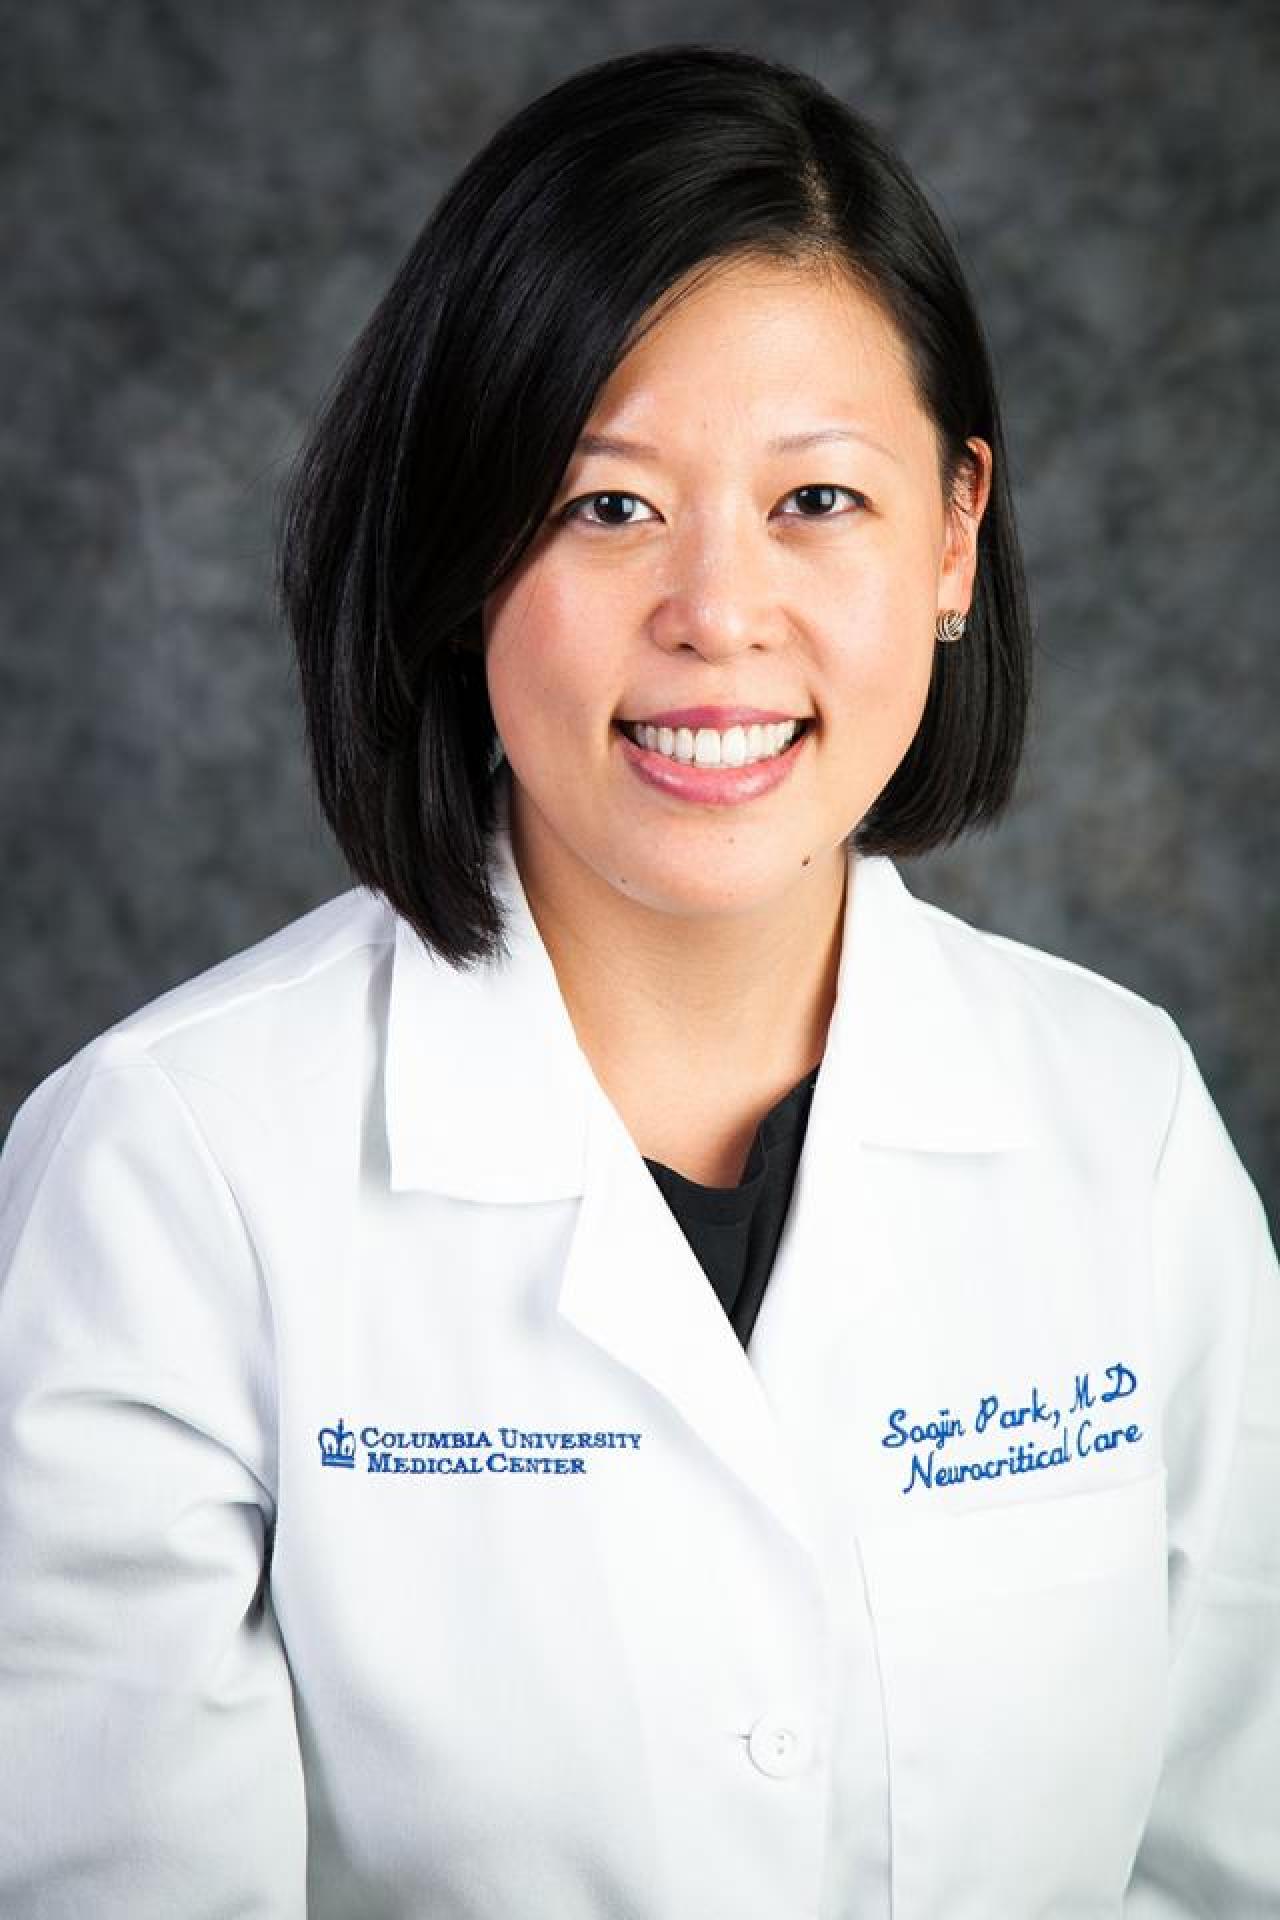 Dr. Soojin Park, Neurocritical care physician at Columbia University